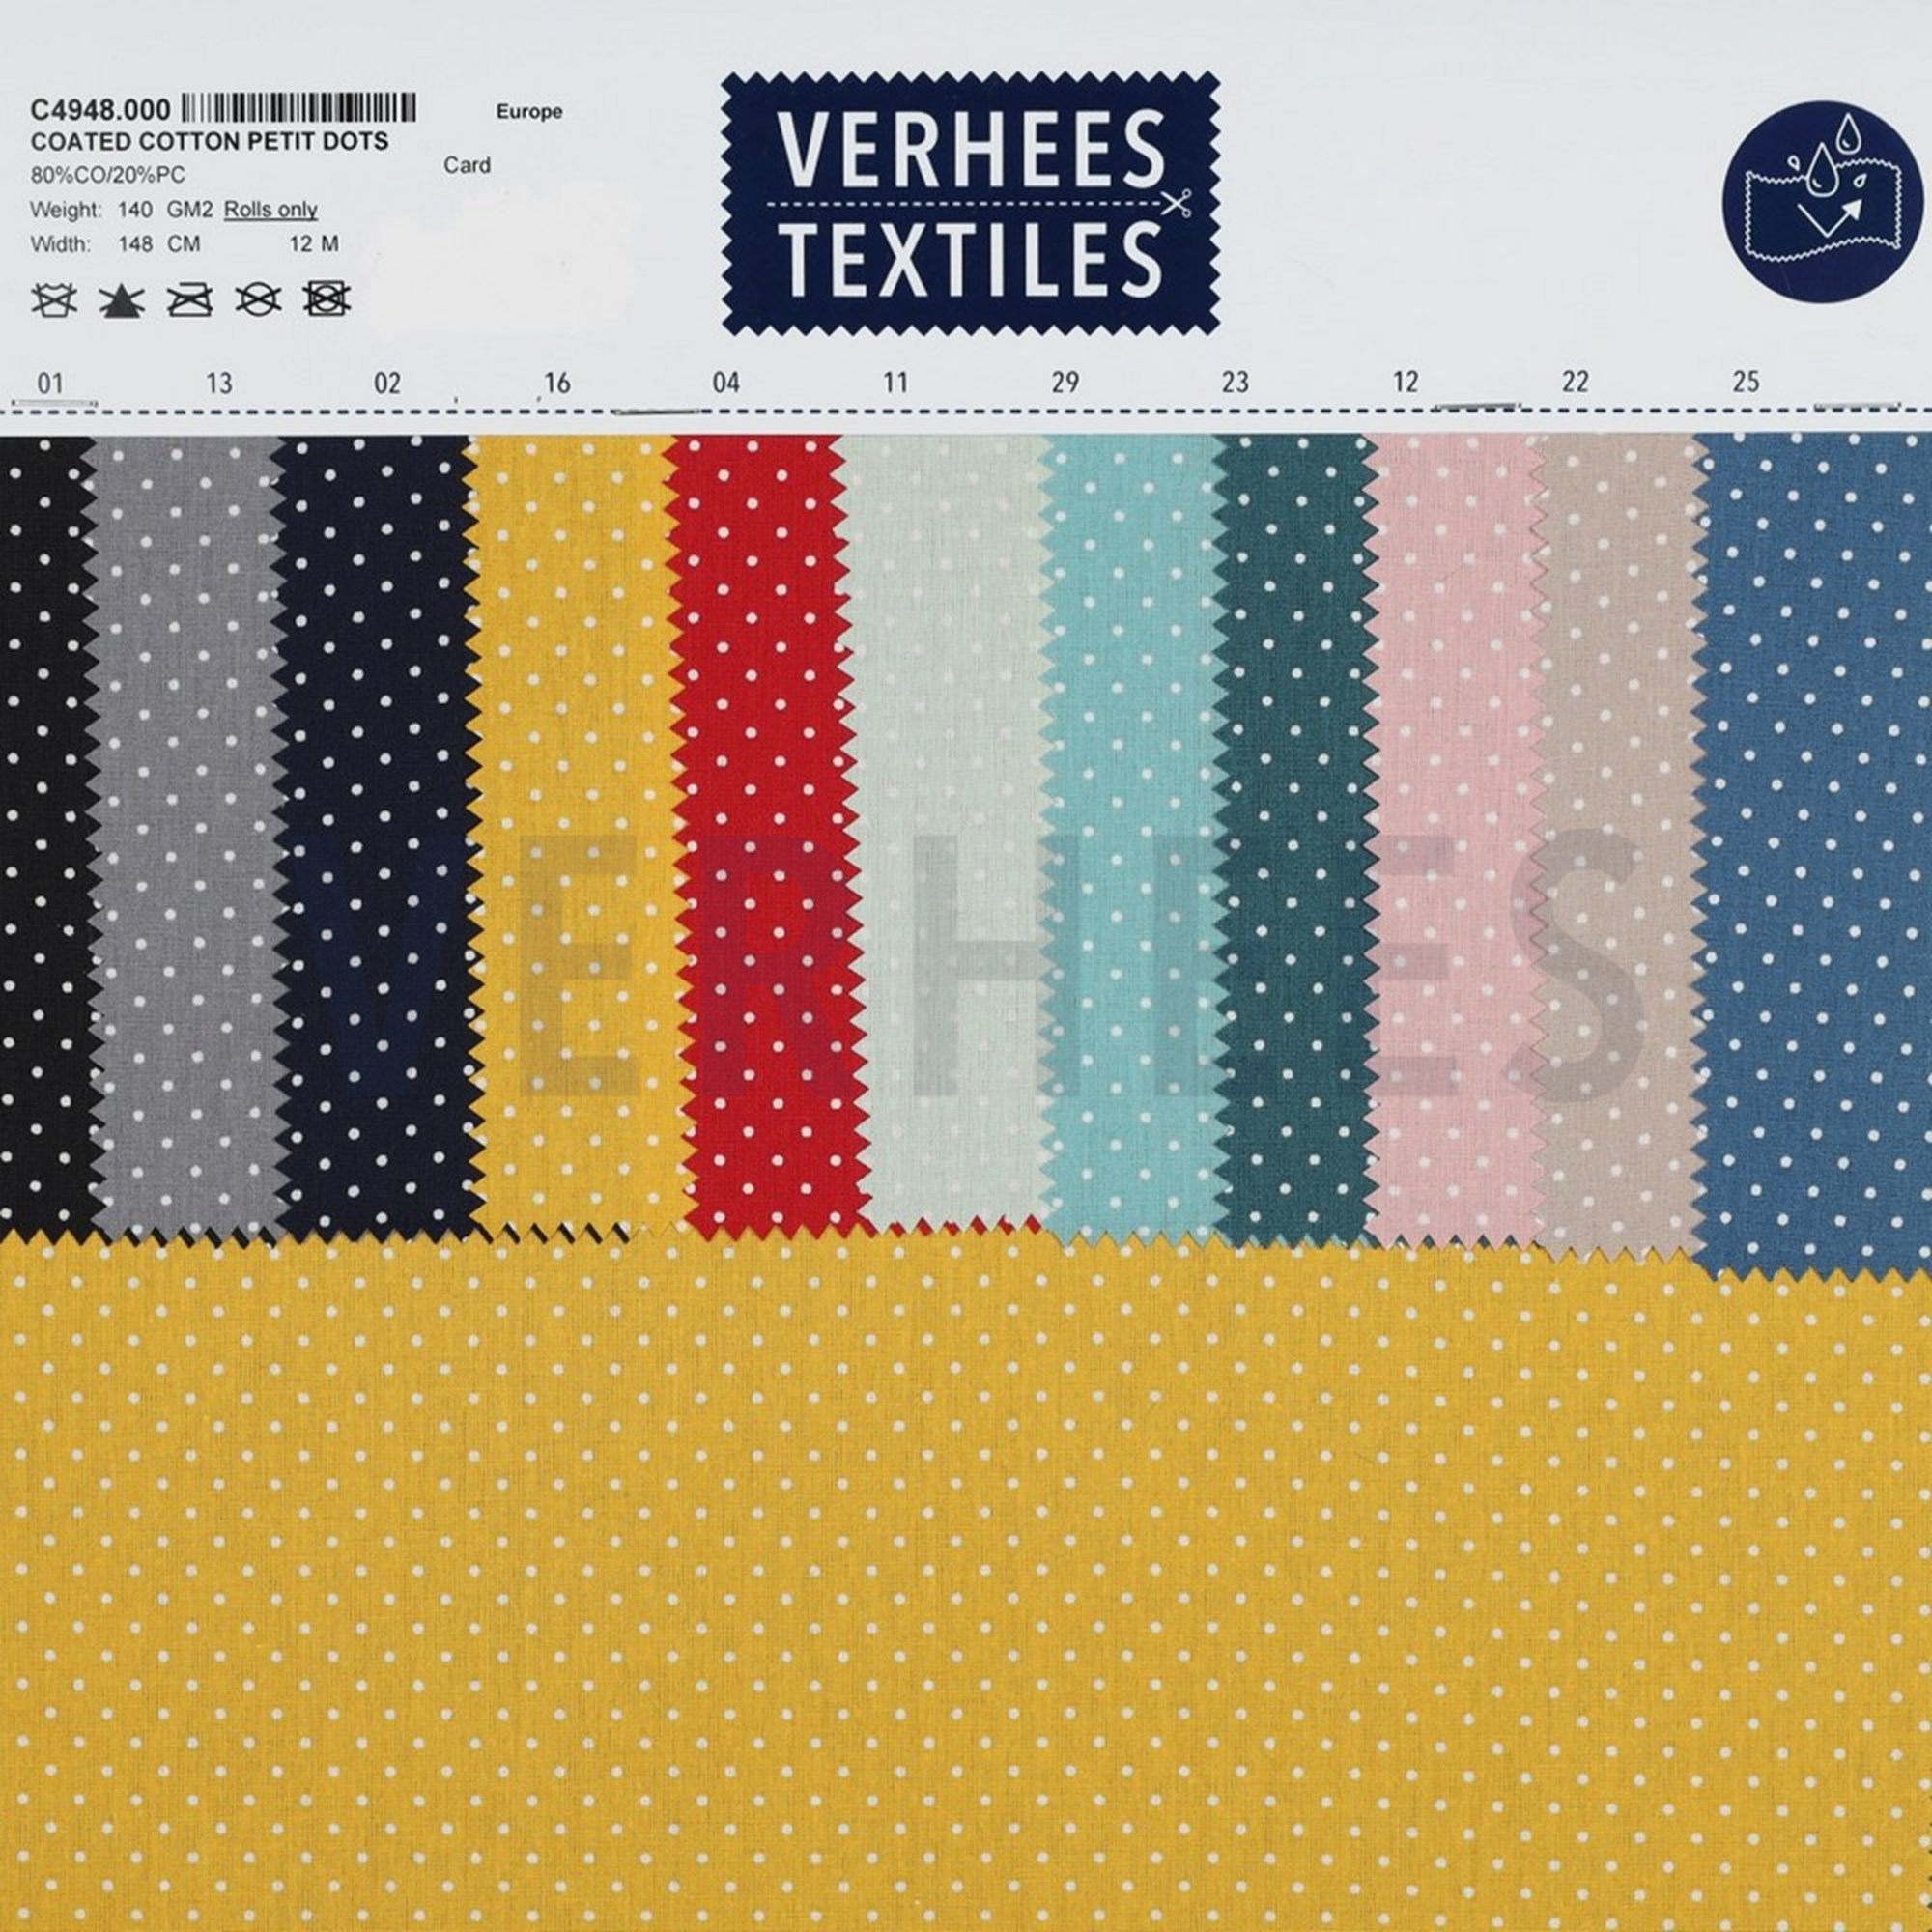 COATED COTTON PETIT DOTS PETROL (high resolution) #4